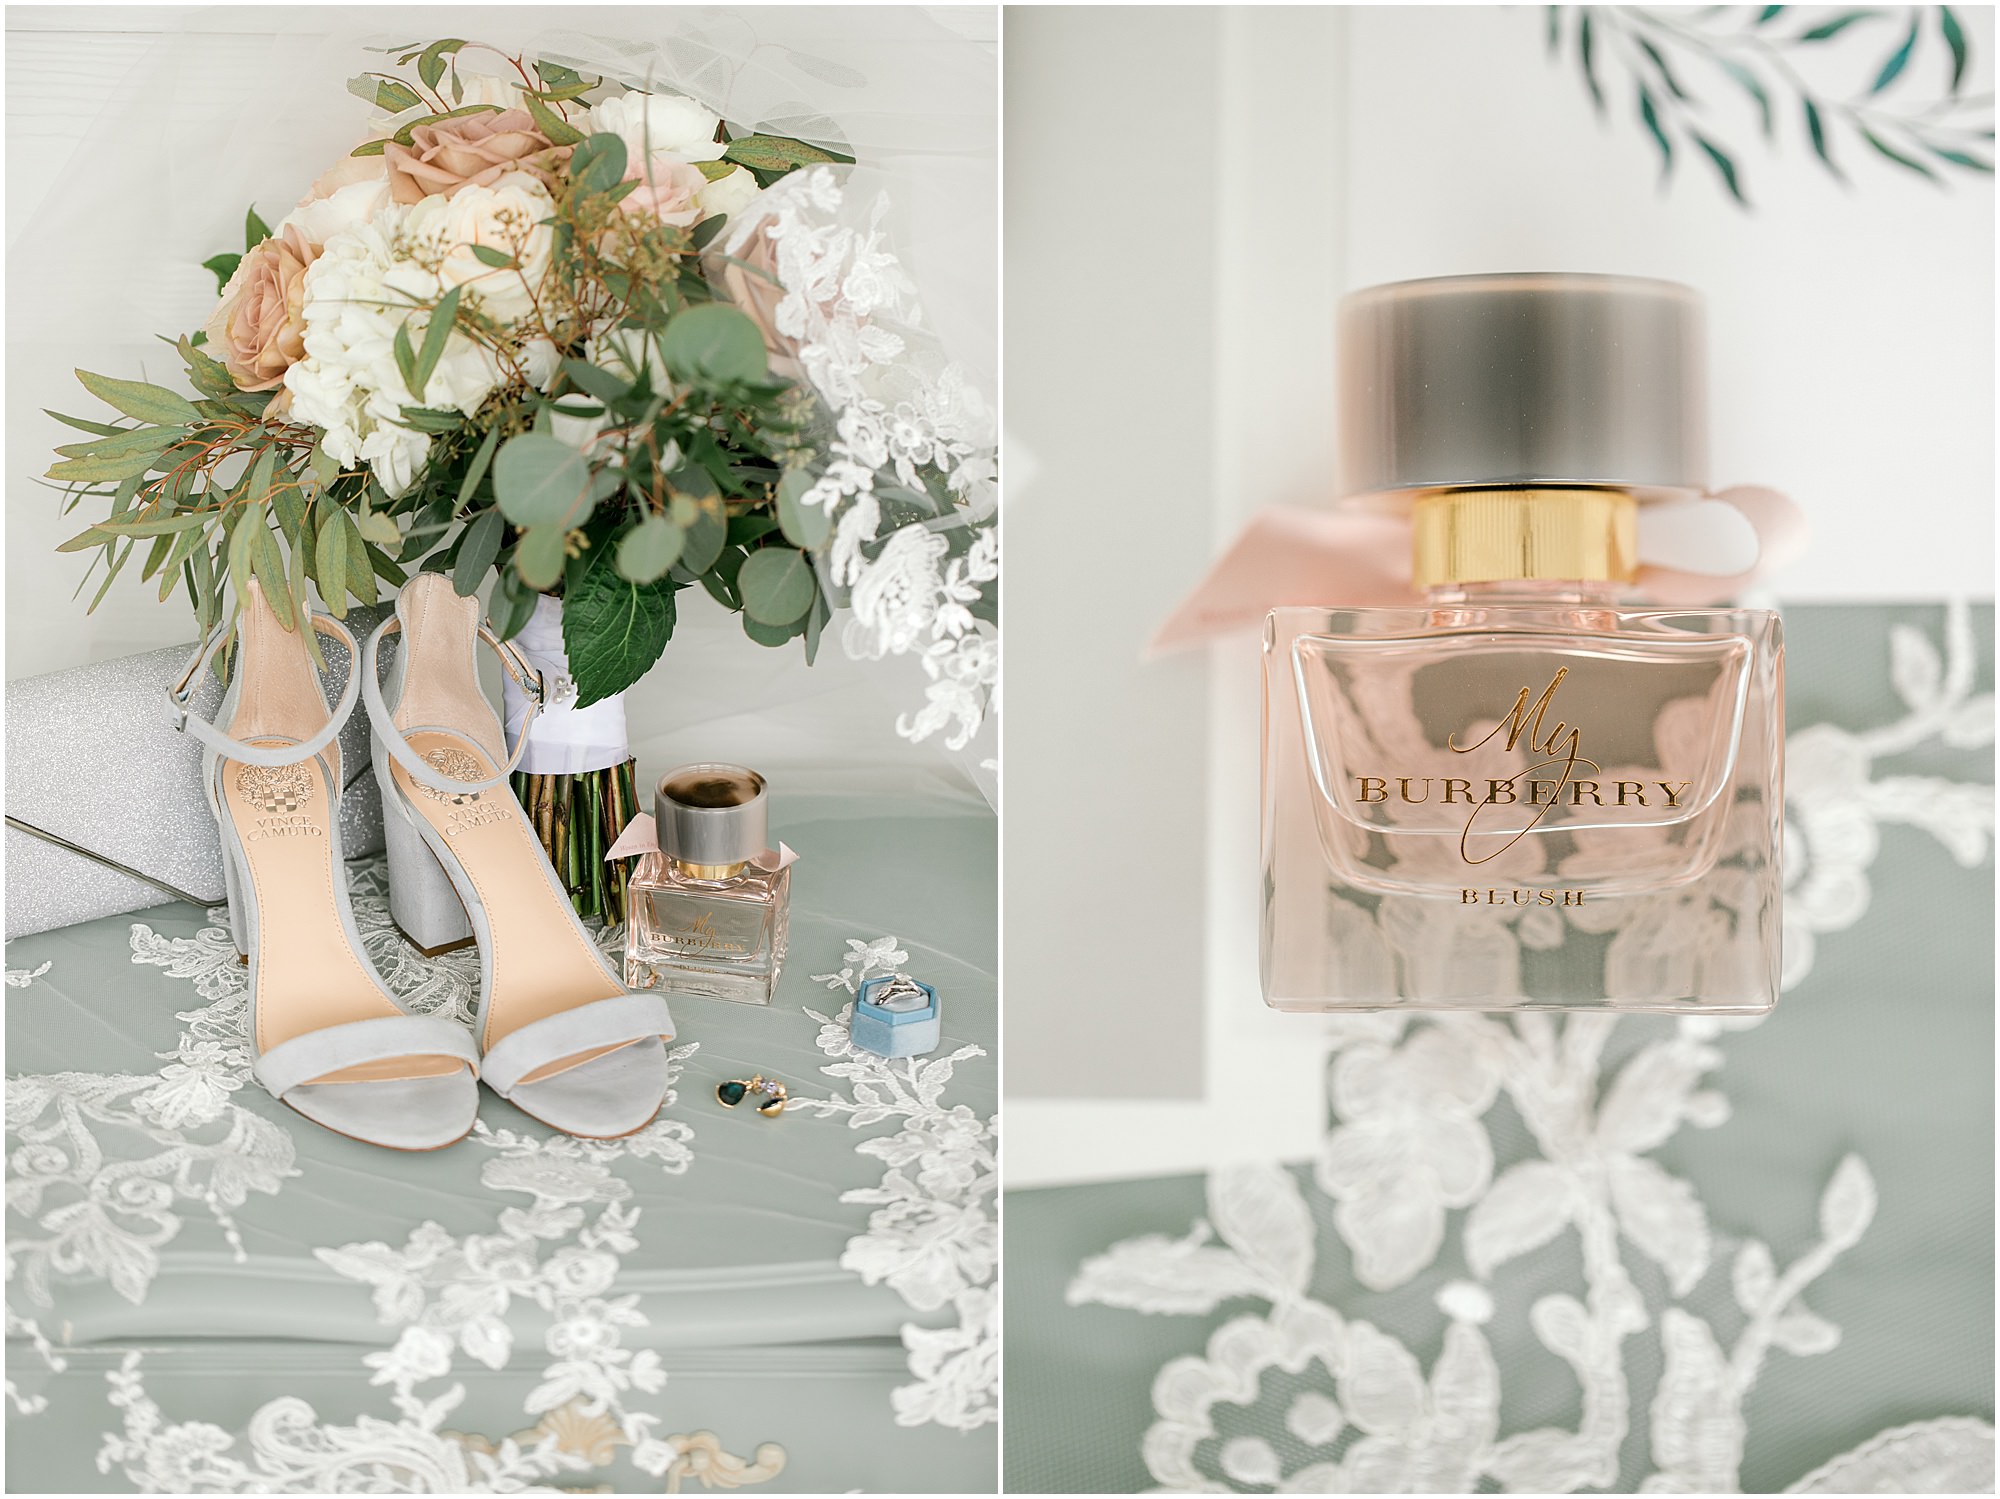 Bridal details like silver shoes and Burberry perfume